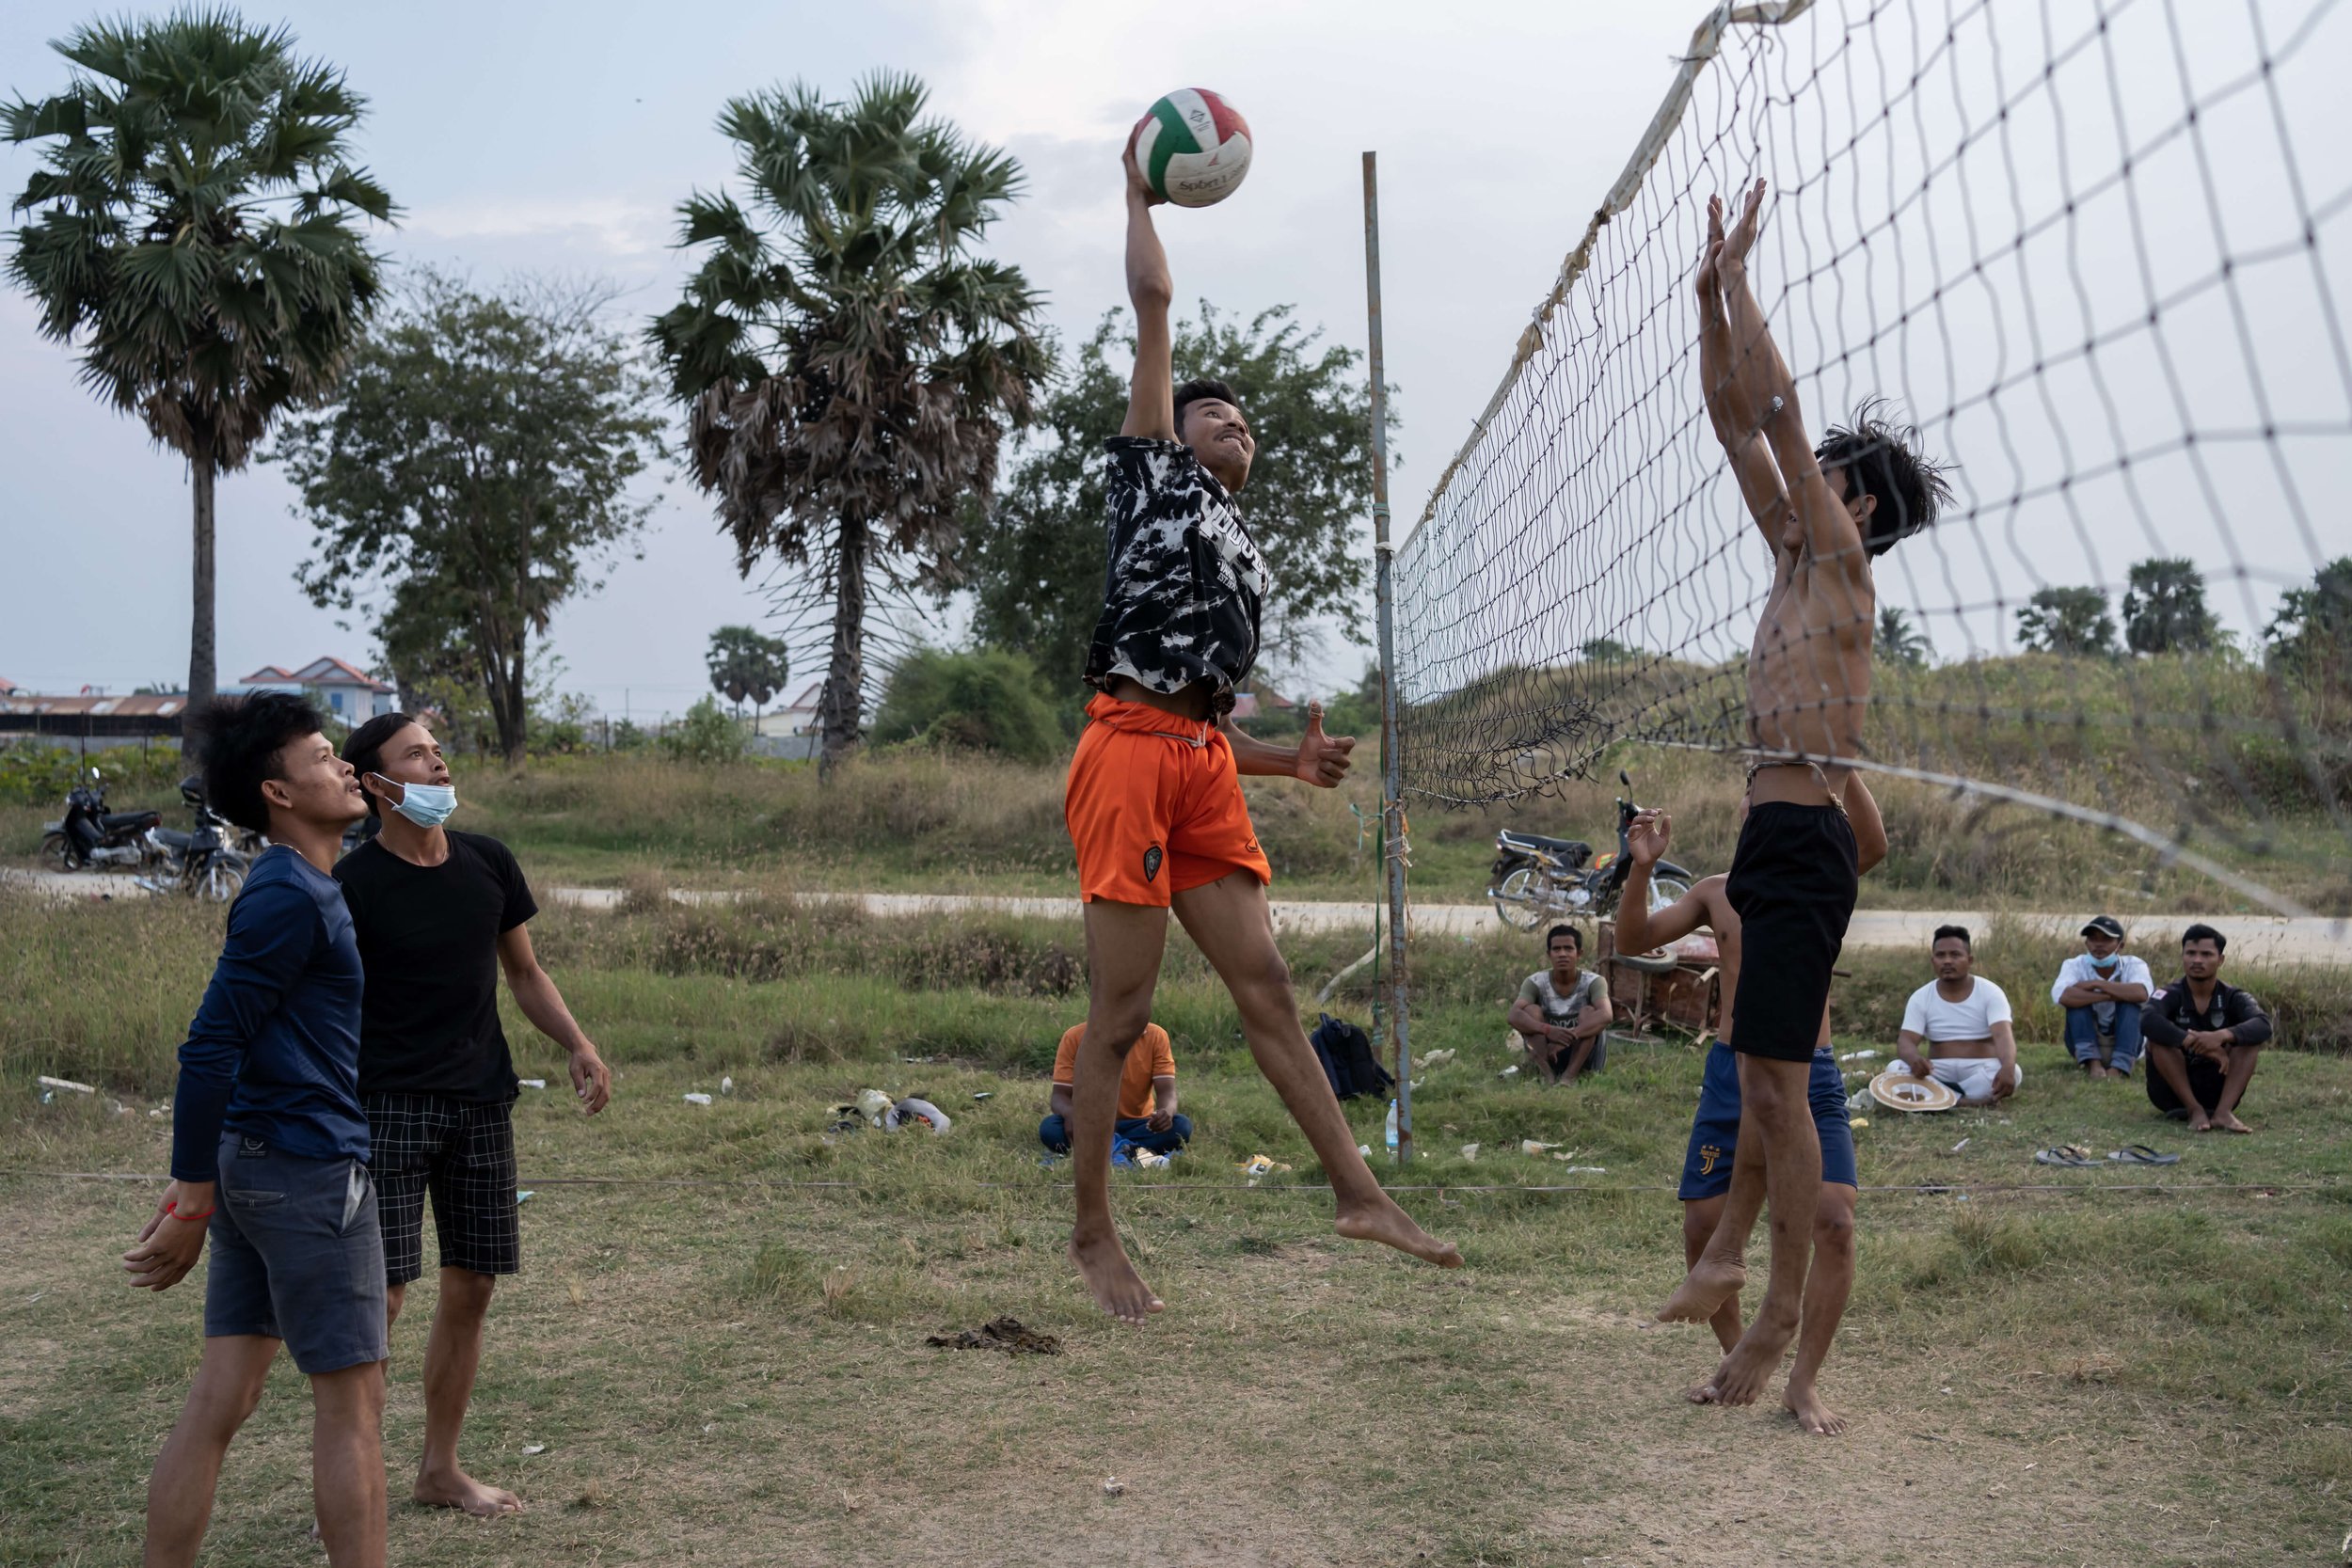  After finishing work, Sun Kim Yan, Sim Ry, Dieb Phearum, Phan Sochantra, and Sim Rib play volleyball with other construction workers at a field in Kambol district. Sim Ry says they play volleyball to build “strength and solidarity” within the team a